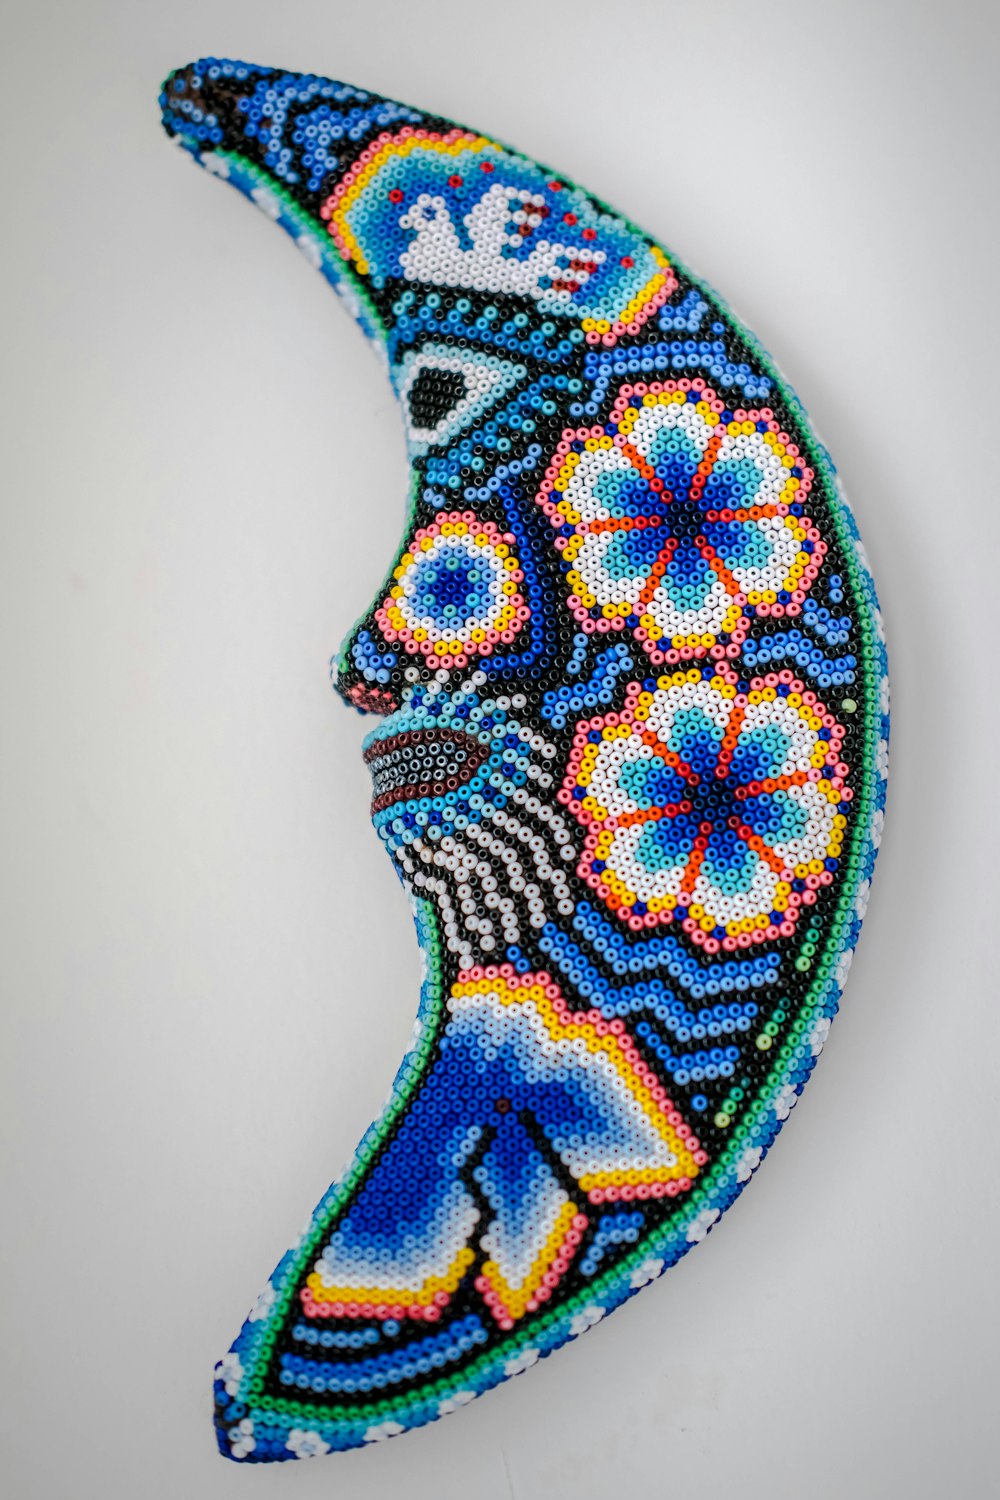 a beaded picture of a woman's face on a crescent